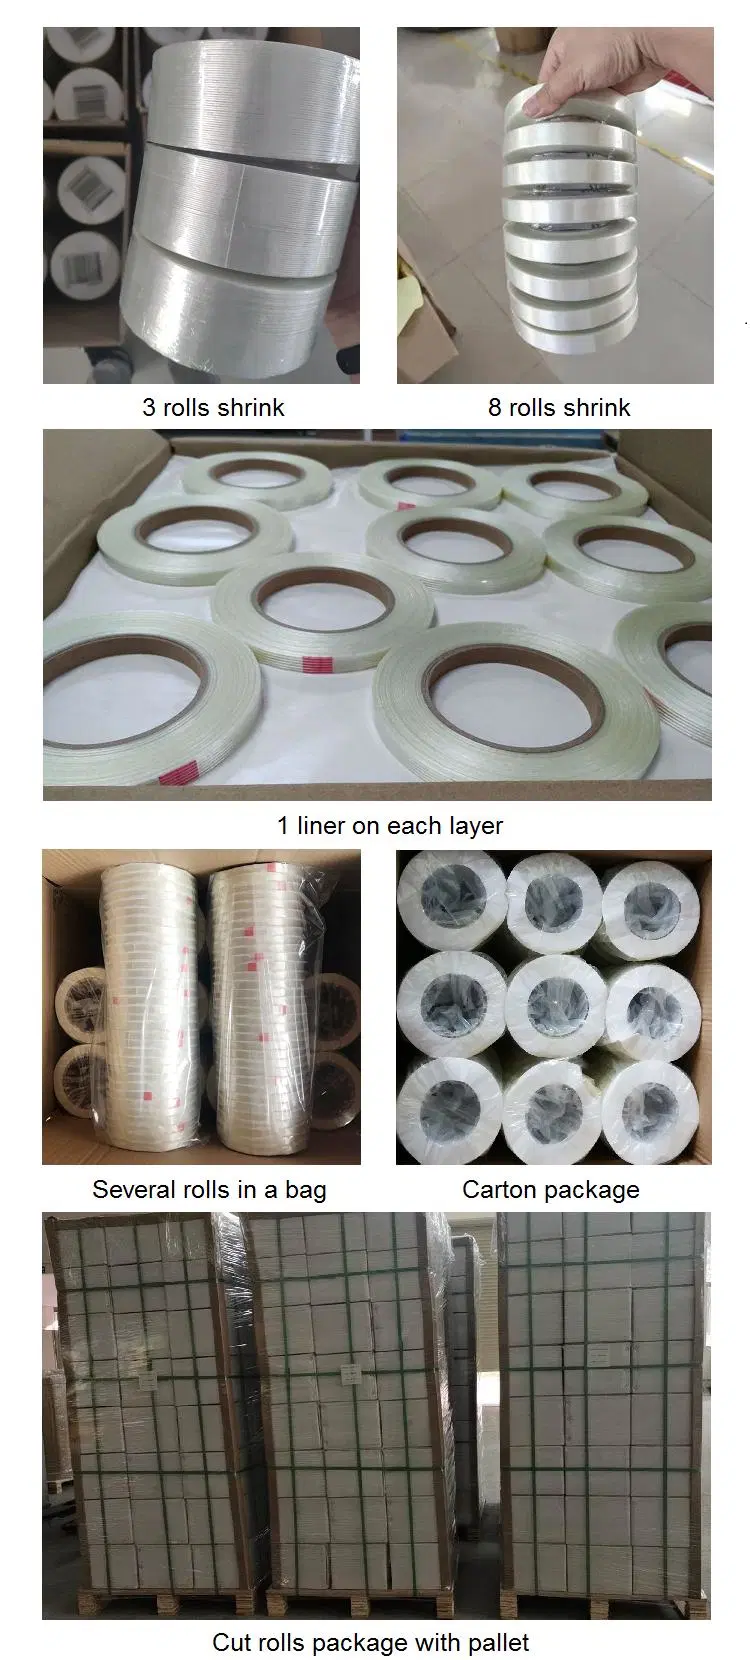 One Direction Filament Fiberglass Tape for Metal/Wood Materials Furnishing Packing